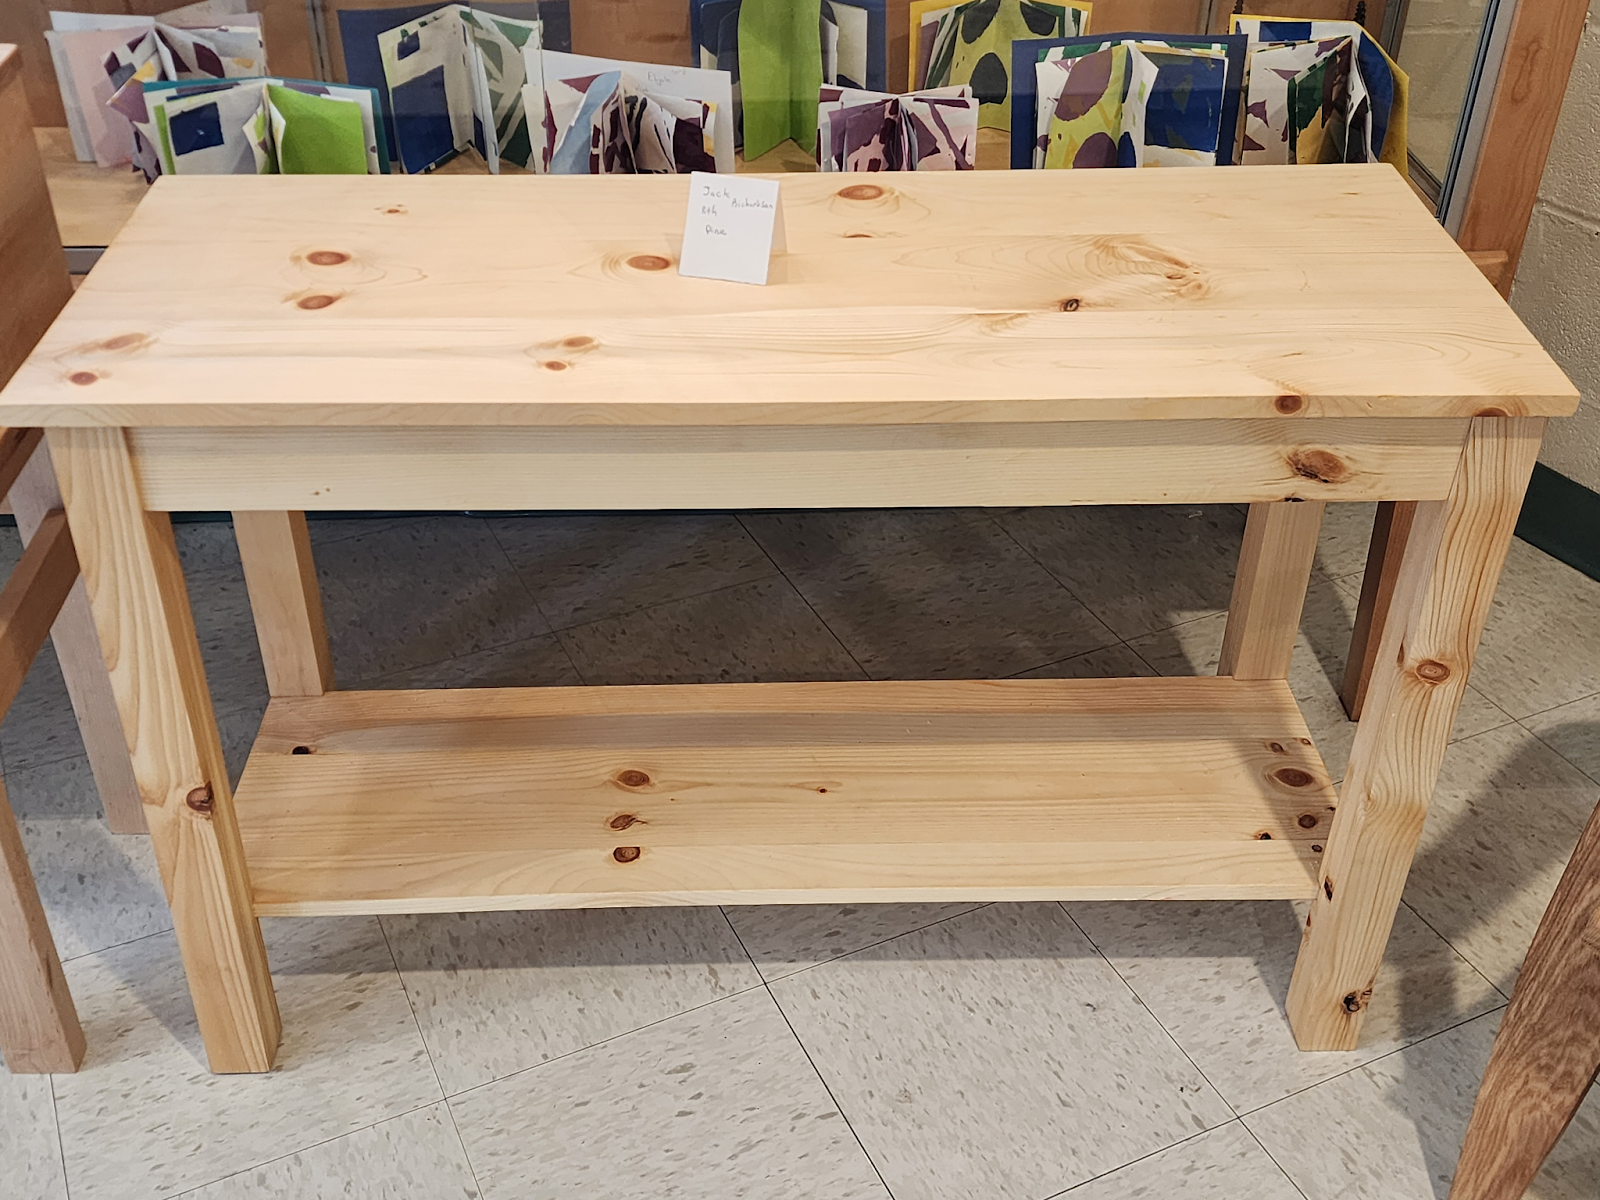 student made table